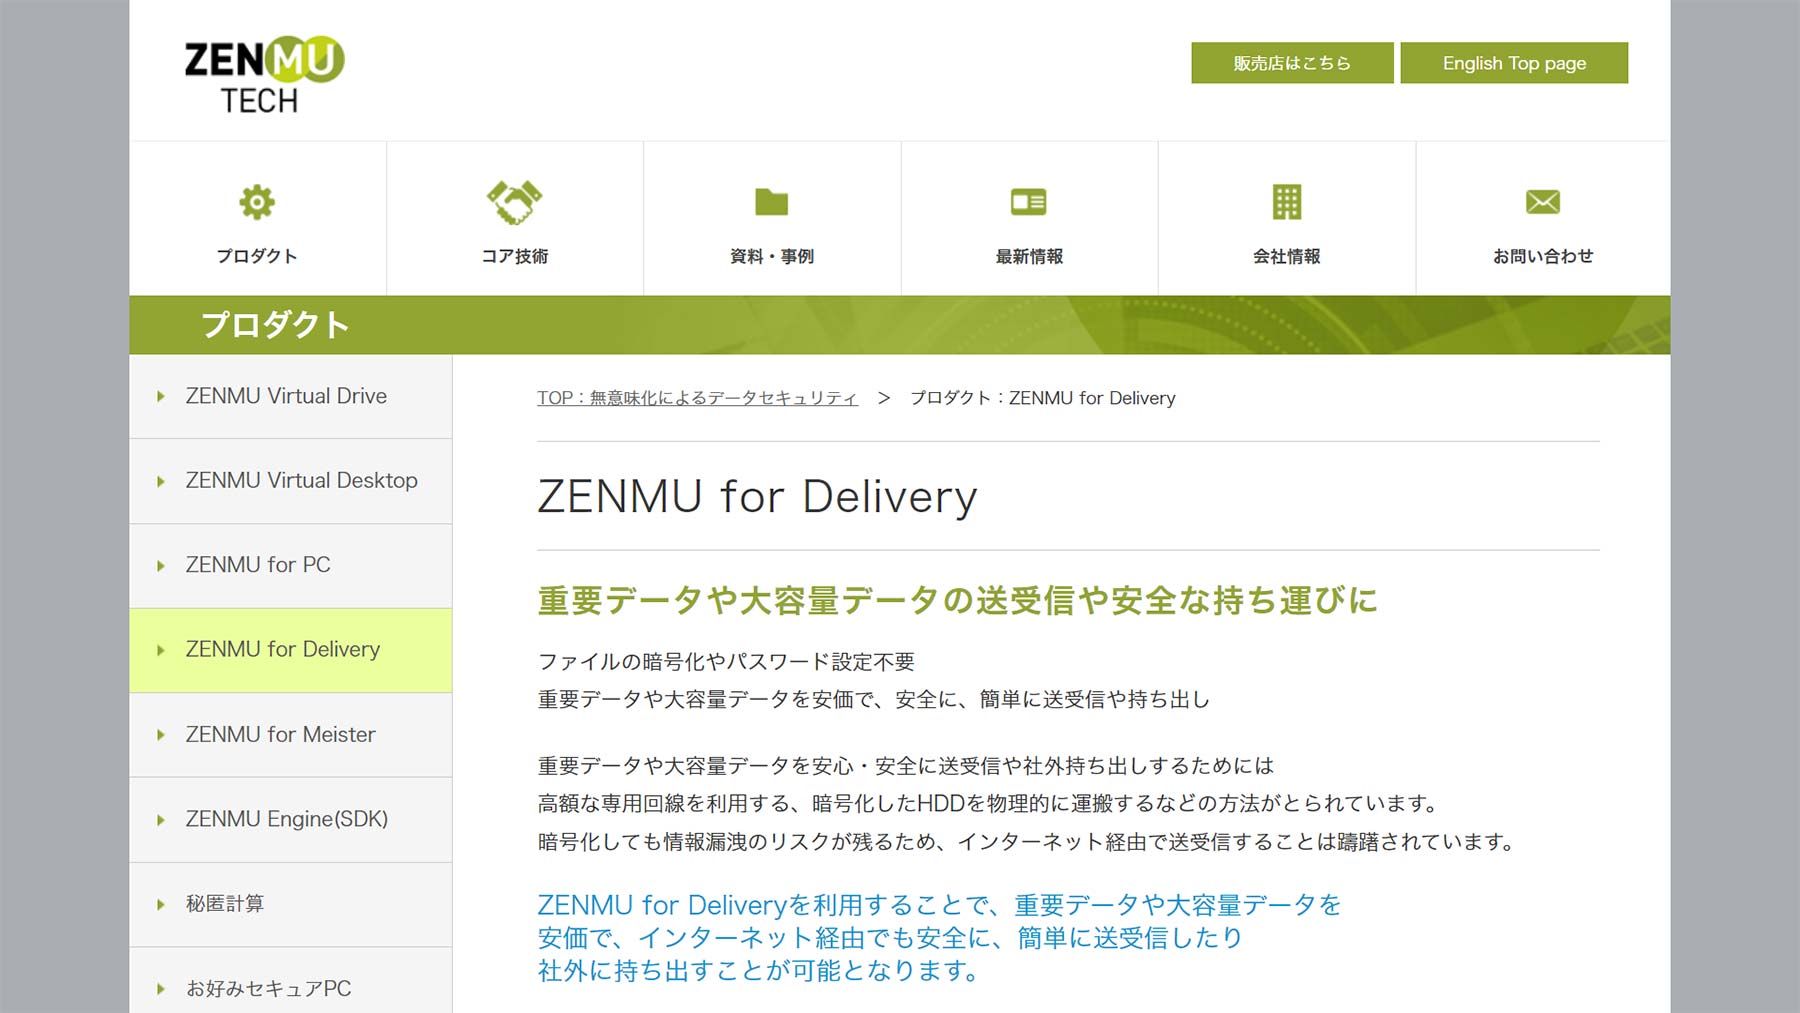 ZENMU for Delivery公式Webサイト